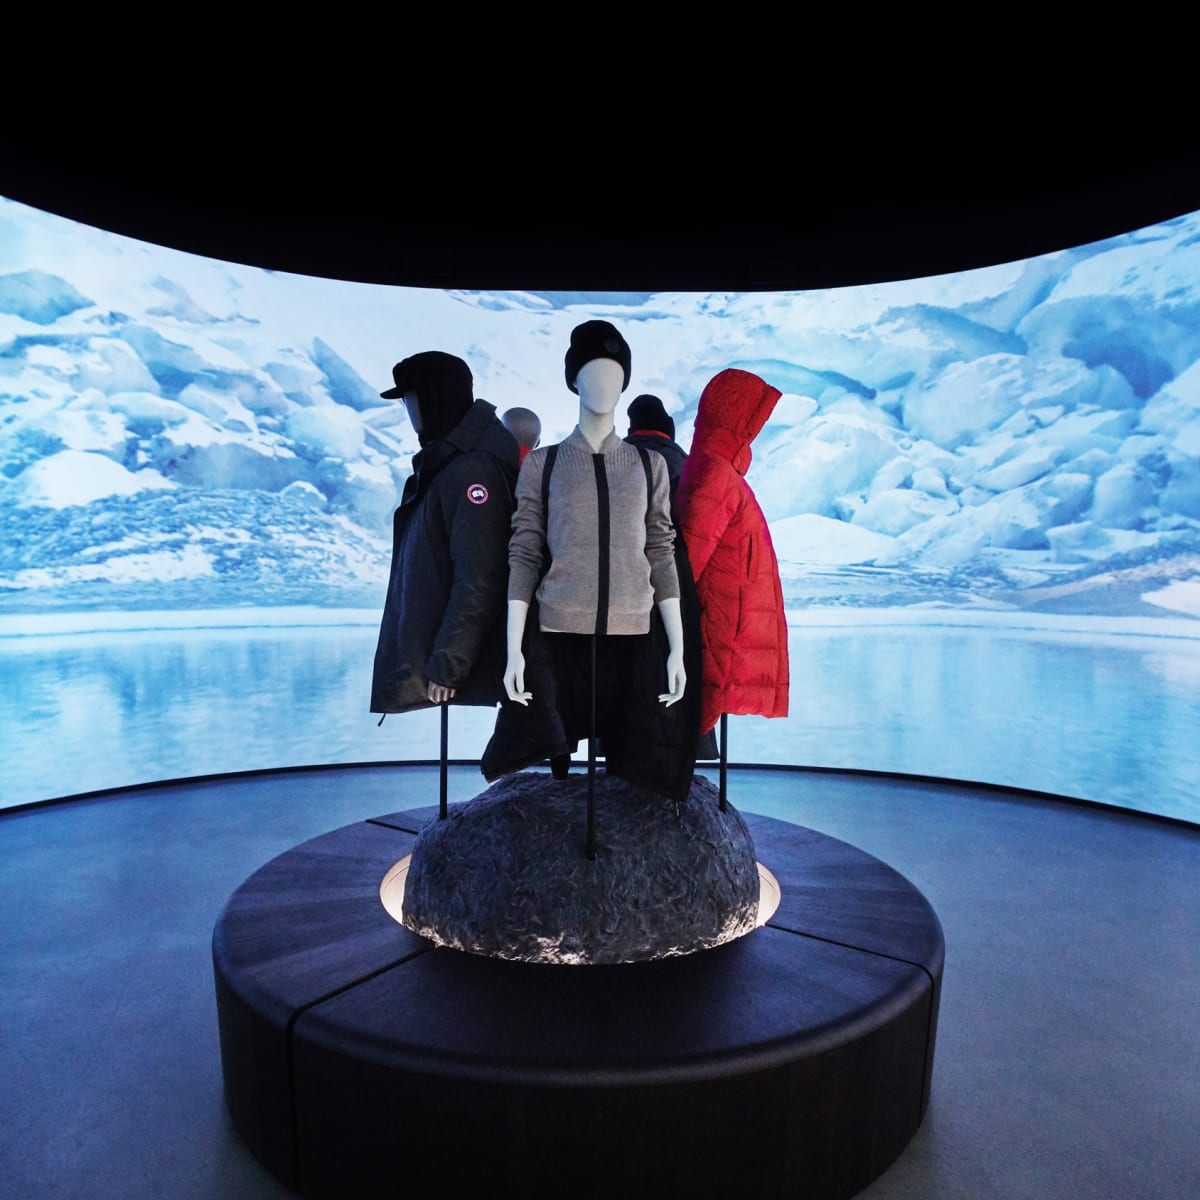 Will Canada Goose's Latest 'Experimental' Concept Attract the Next